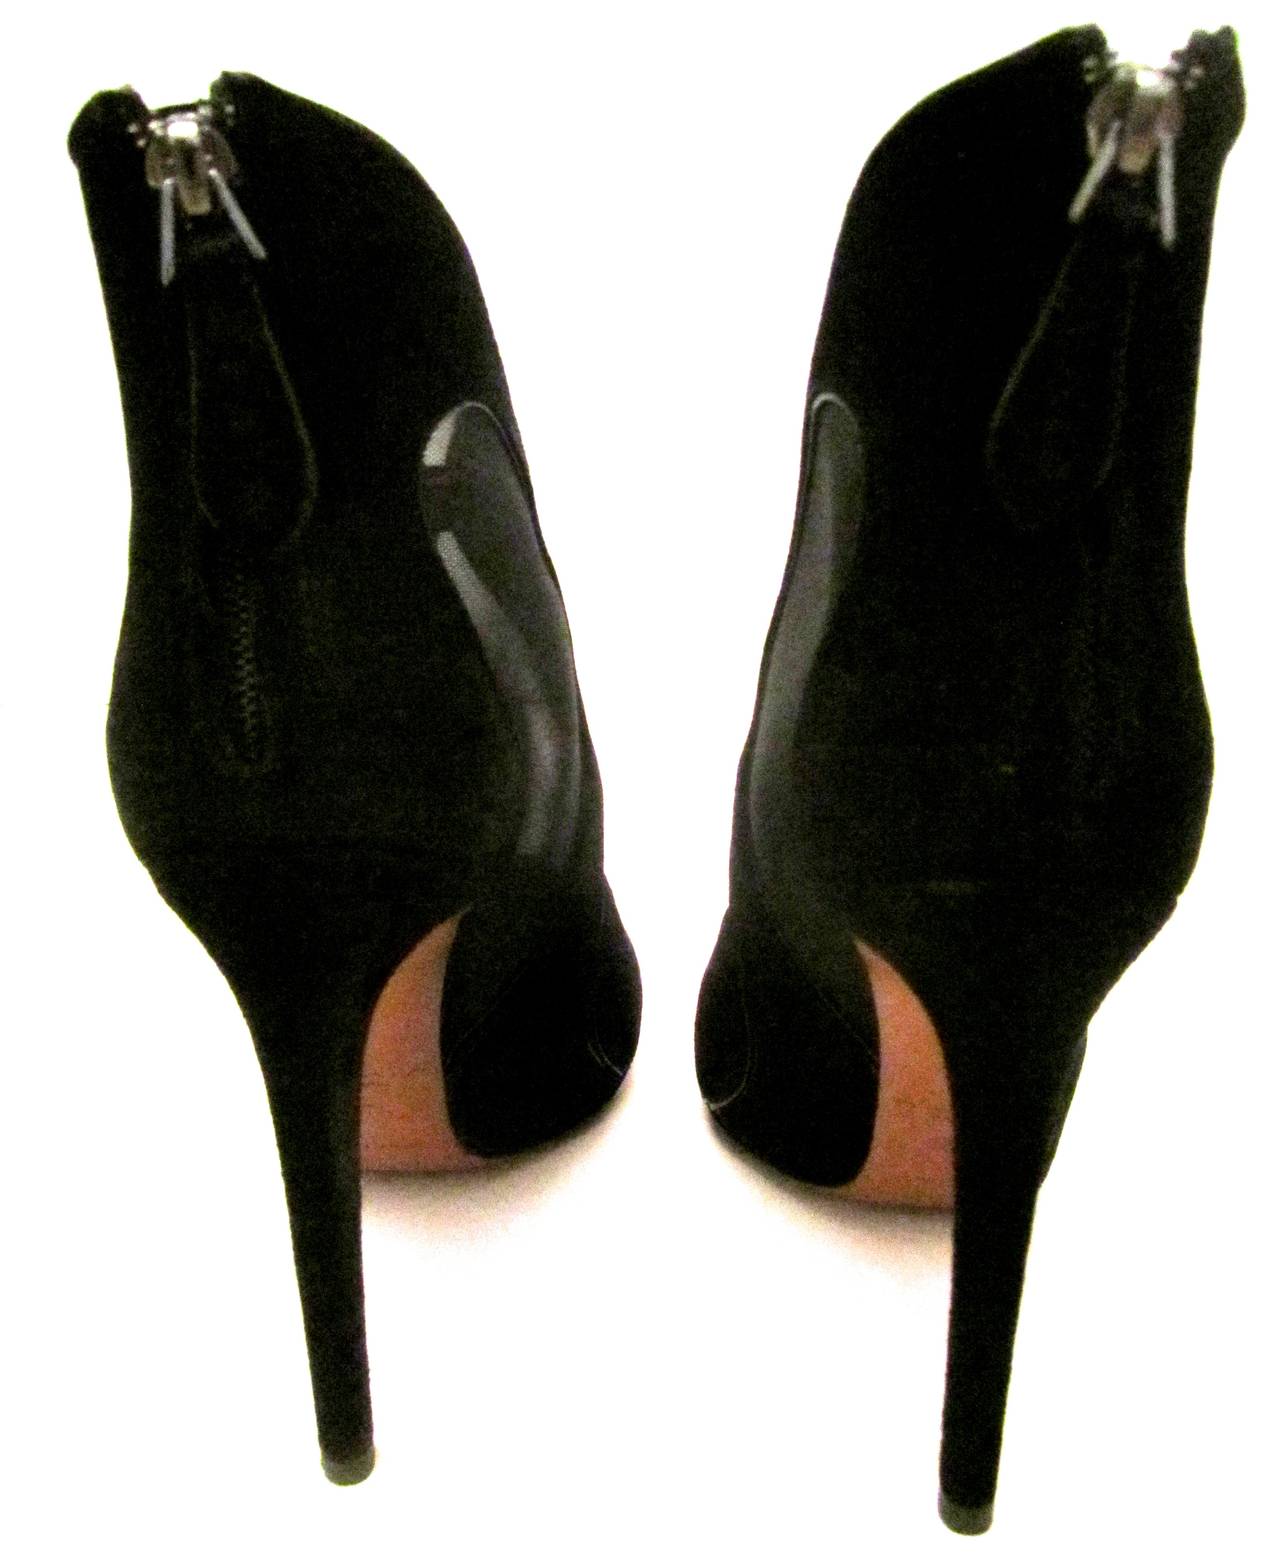 New Alaia High Heeled Boots - Black Suede and Sheer - Size 37.5 In New Condition For Sale In Boca Raton, FL